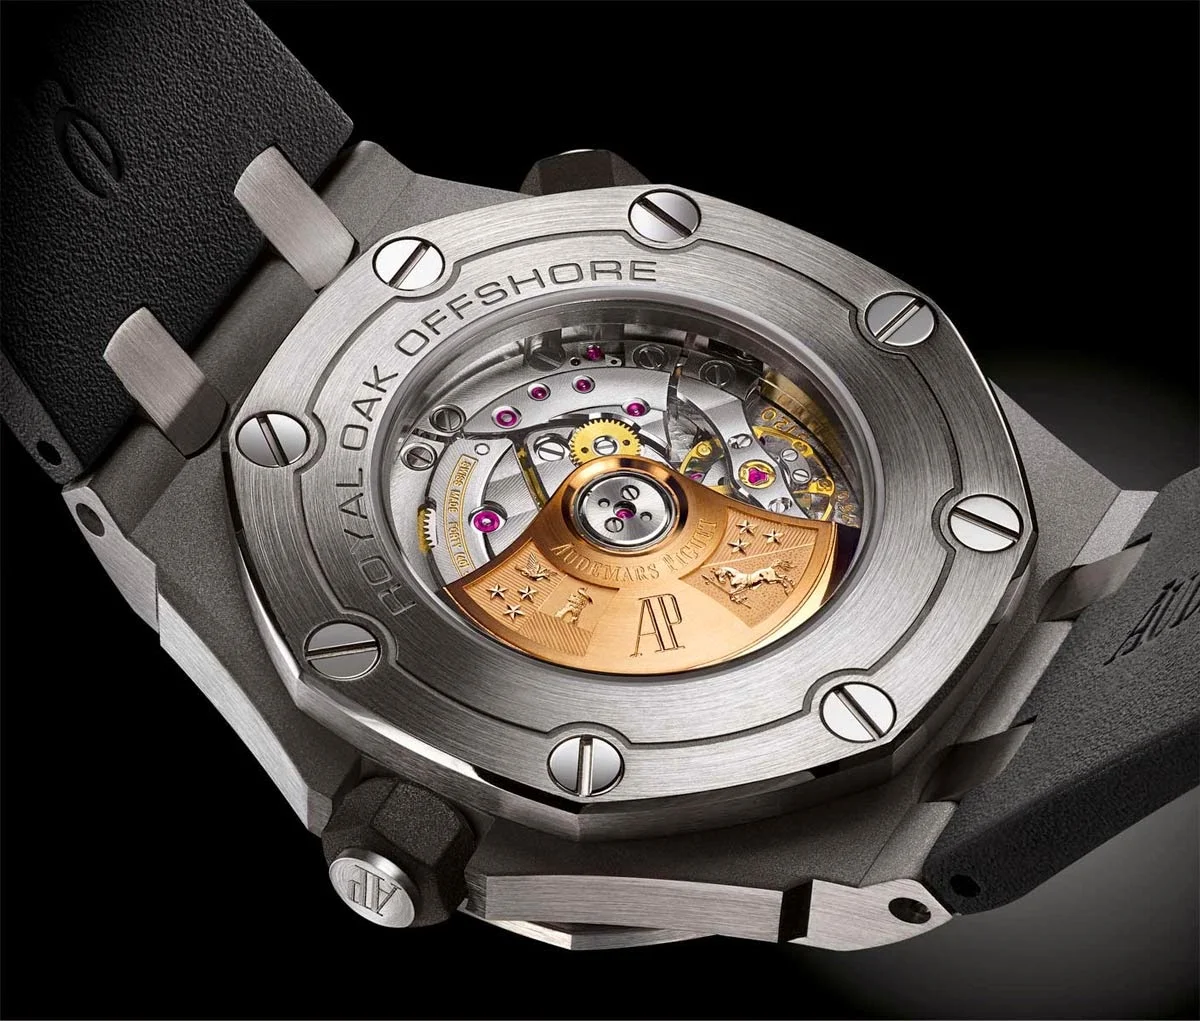 SIHH 2015: Audemars Piguet - Royal Oak Offshore Diver Ref. 15710 | Time and  Watches | The watch blog